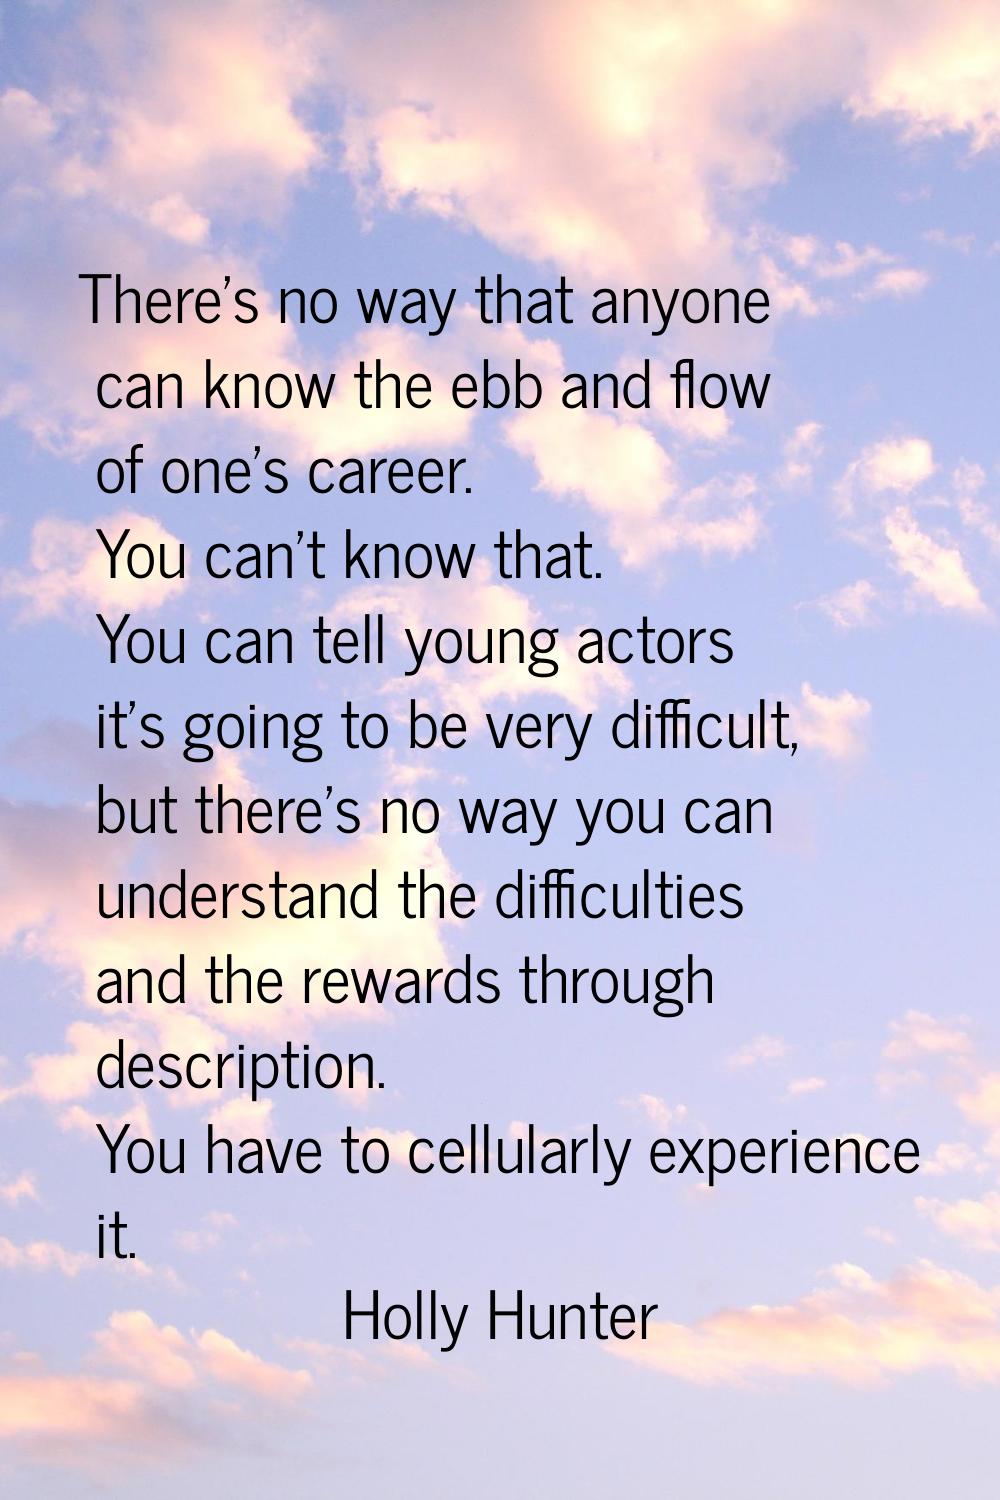 There's no way that anyone can know the ebb and flow of one's career. You can't know that. You can 